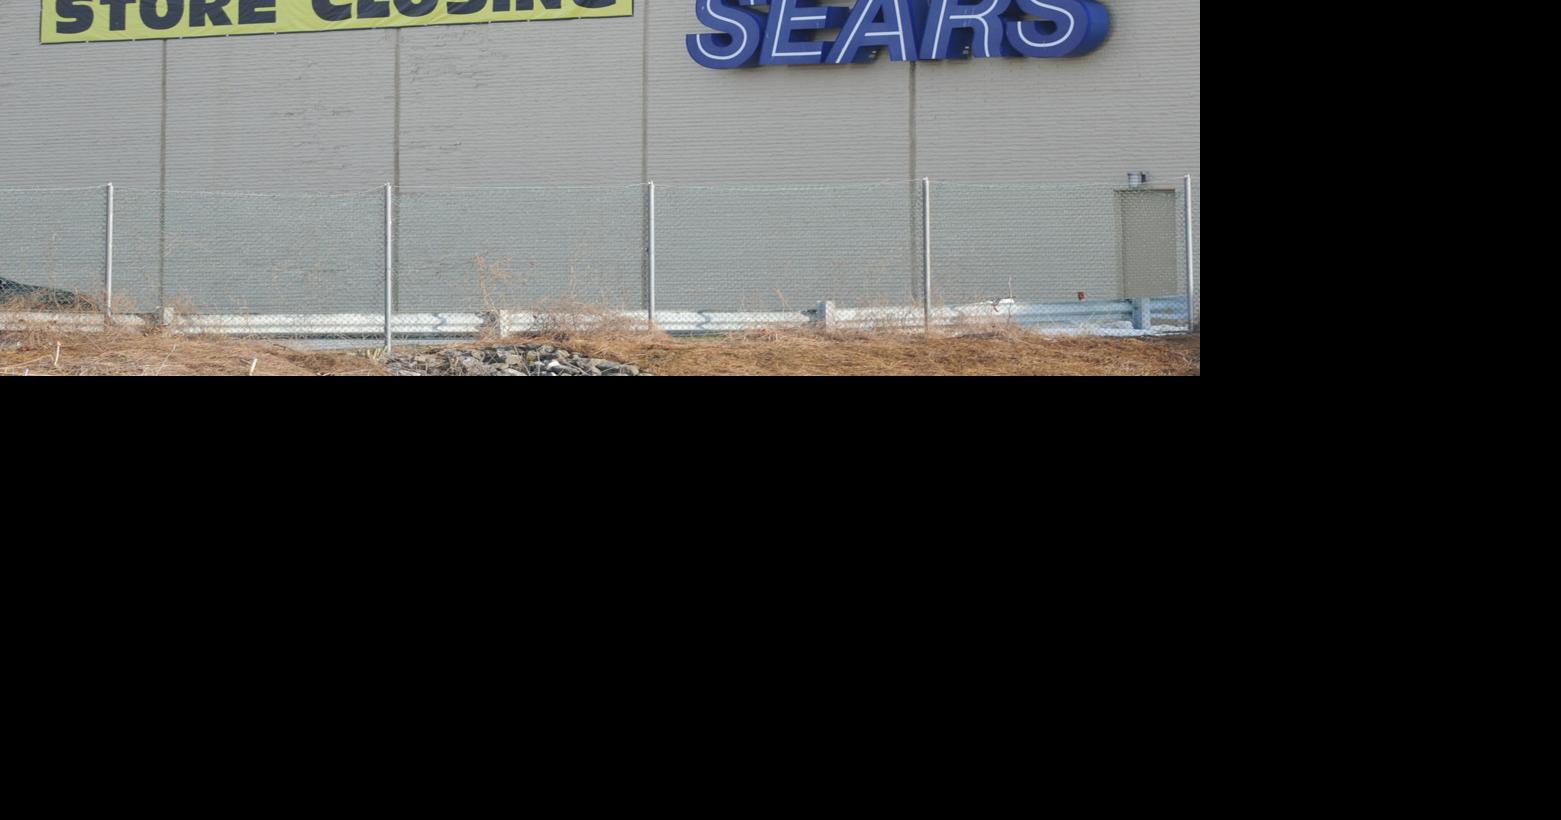 Round 1 Bowling Moving Forward In Portion of Former Cumberland Mall Sears